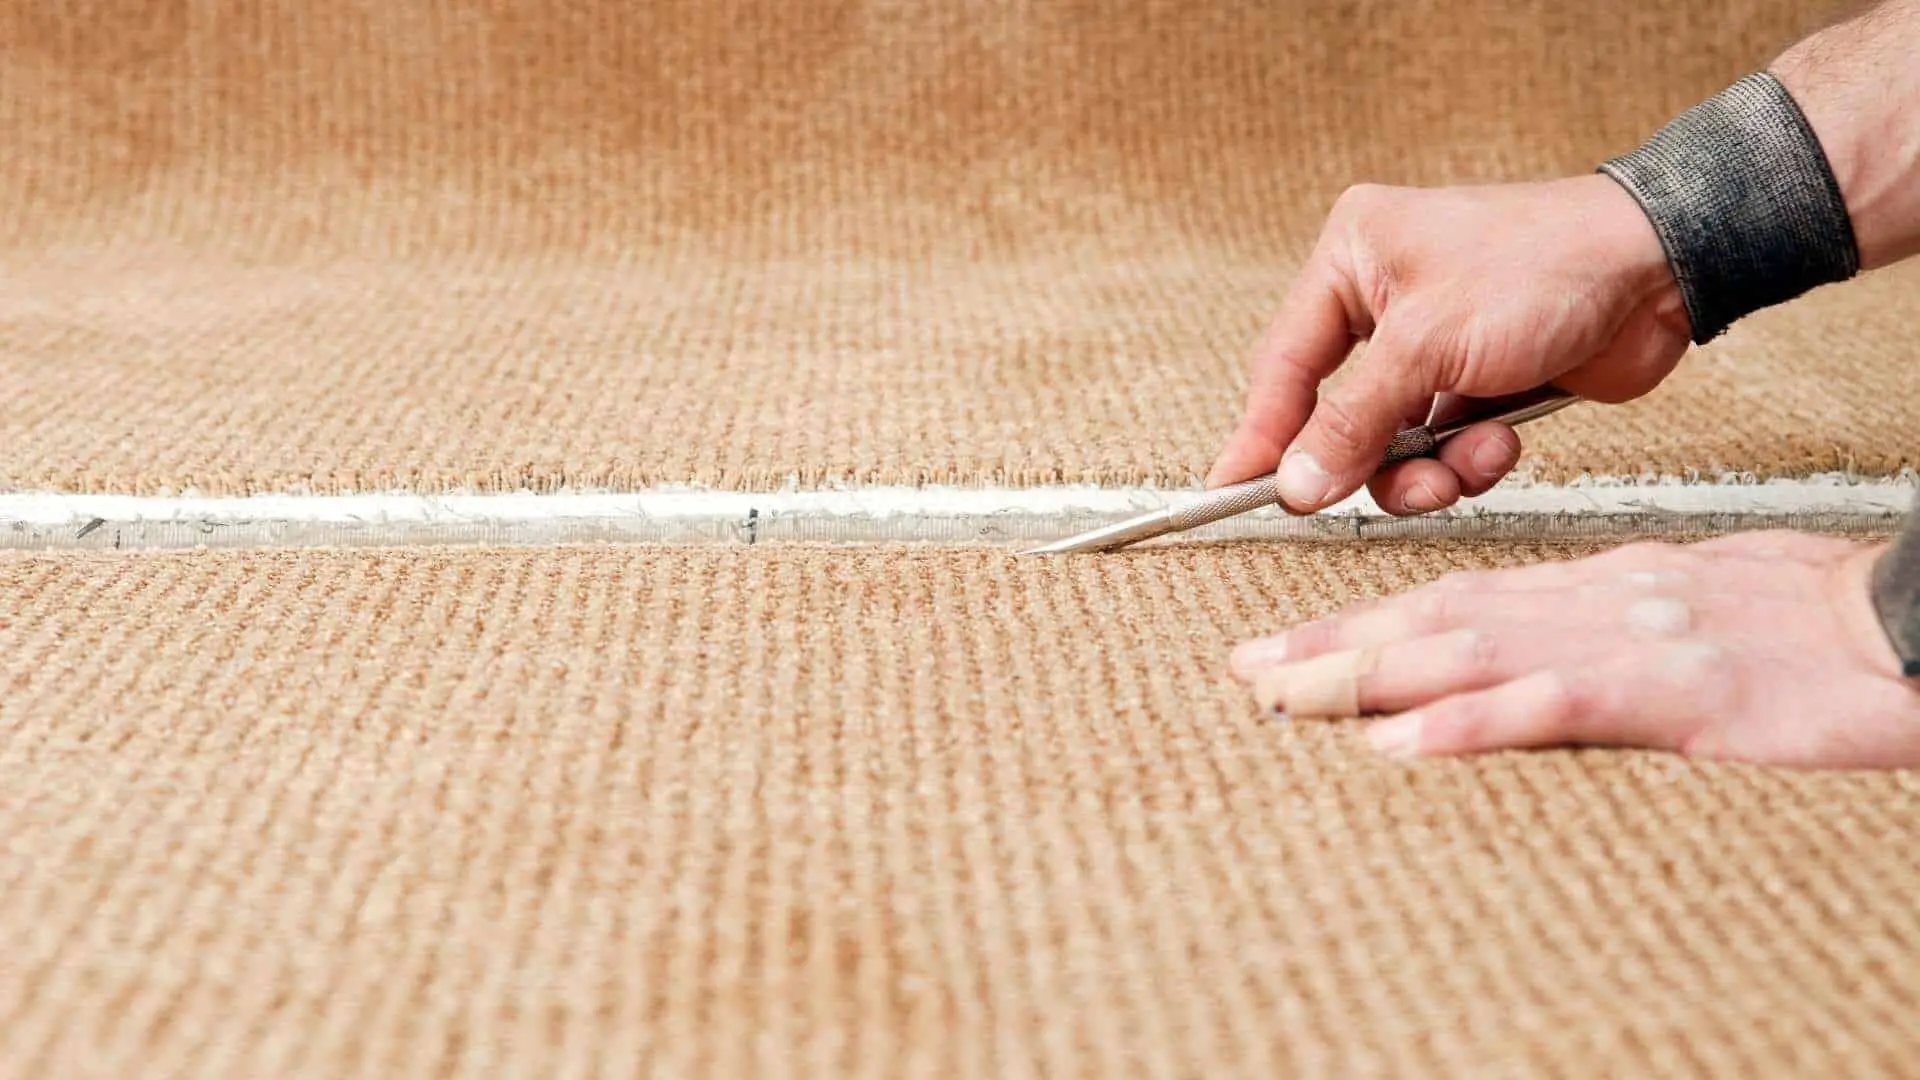 how to seam carpet the right way